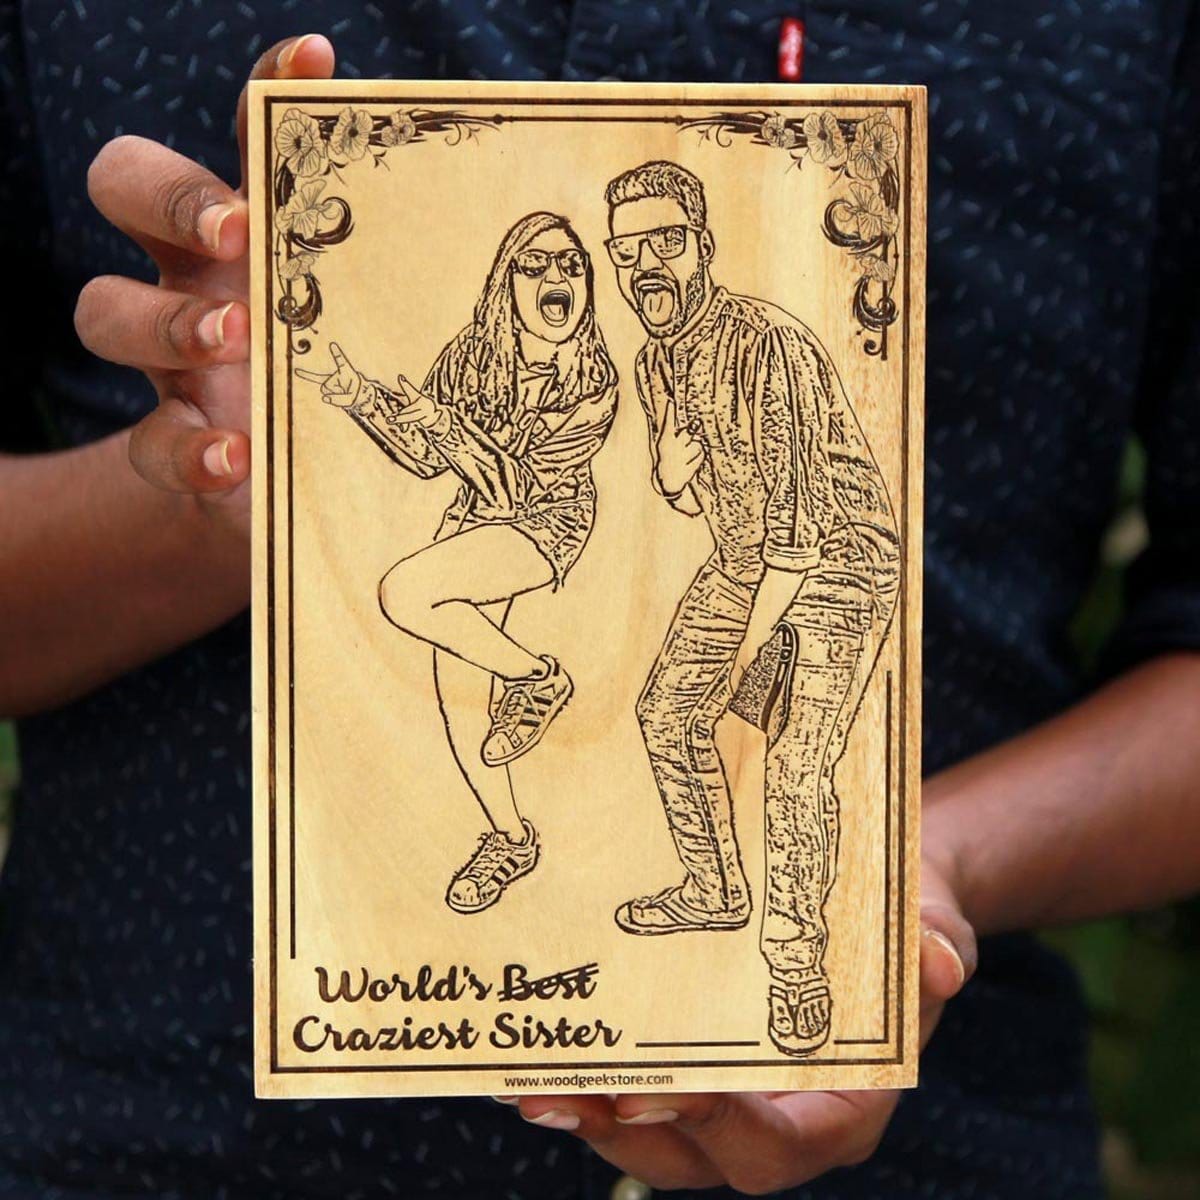 World's Best & Craziest Sister Photo Engraved Wooden Frame. Looking for unique birthday gifts for your sister or rakhi gifts for her? This photo on wood will make the best gift for sister!